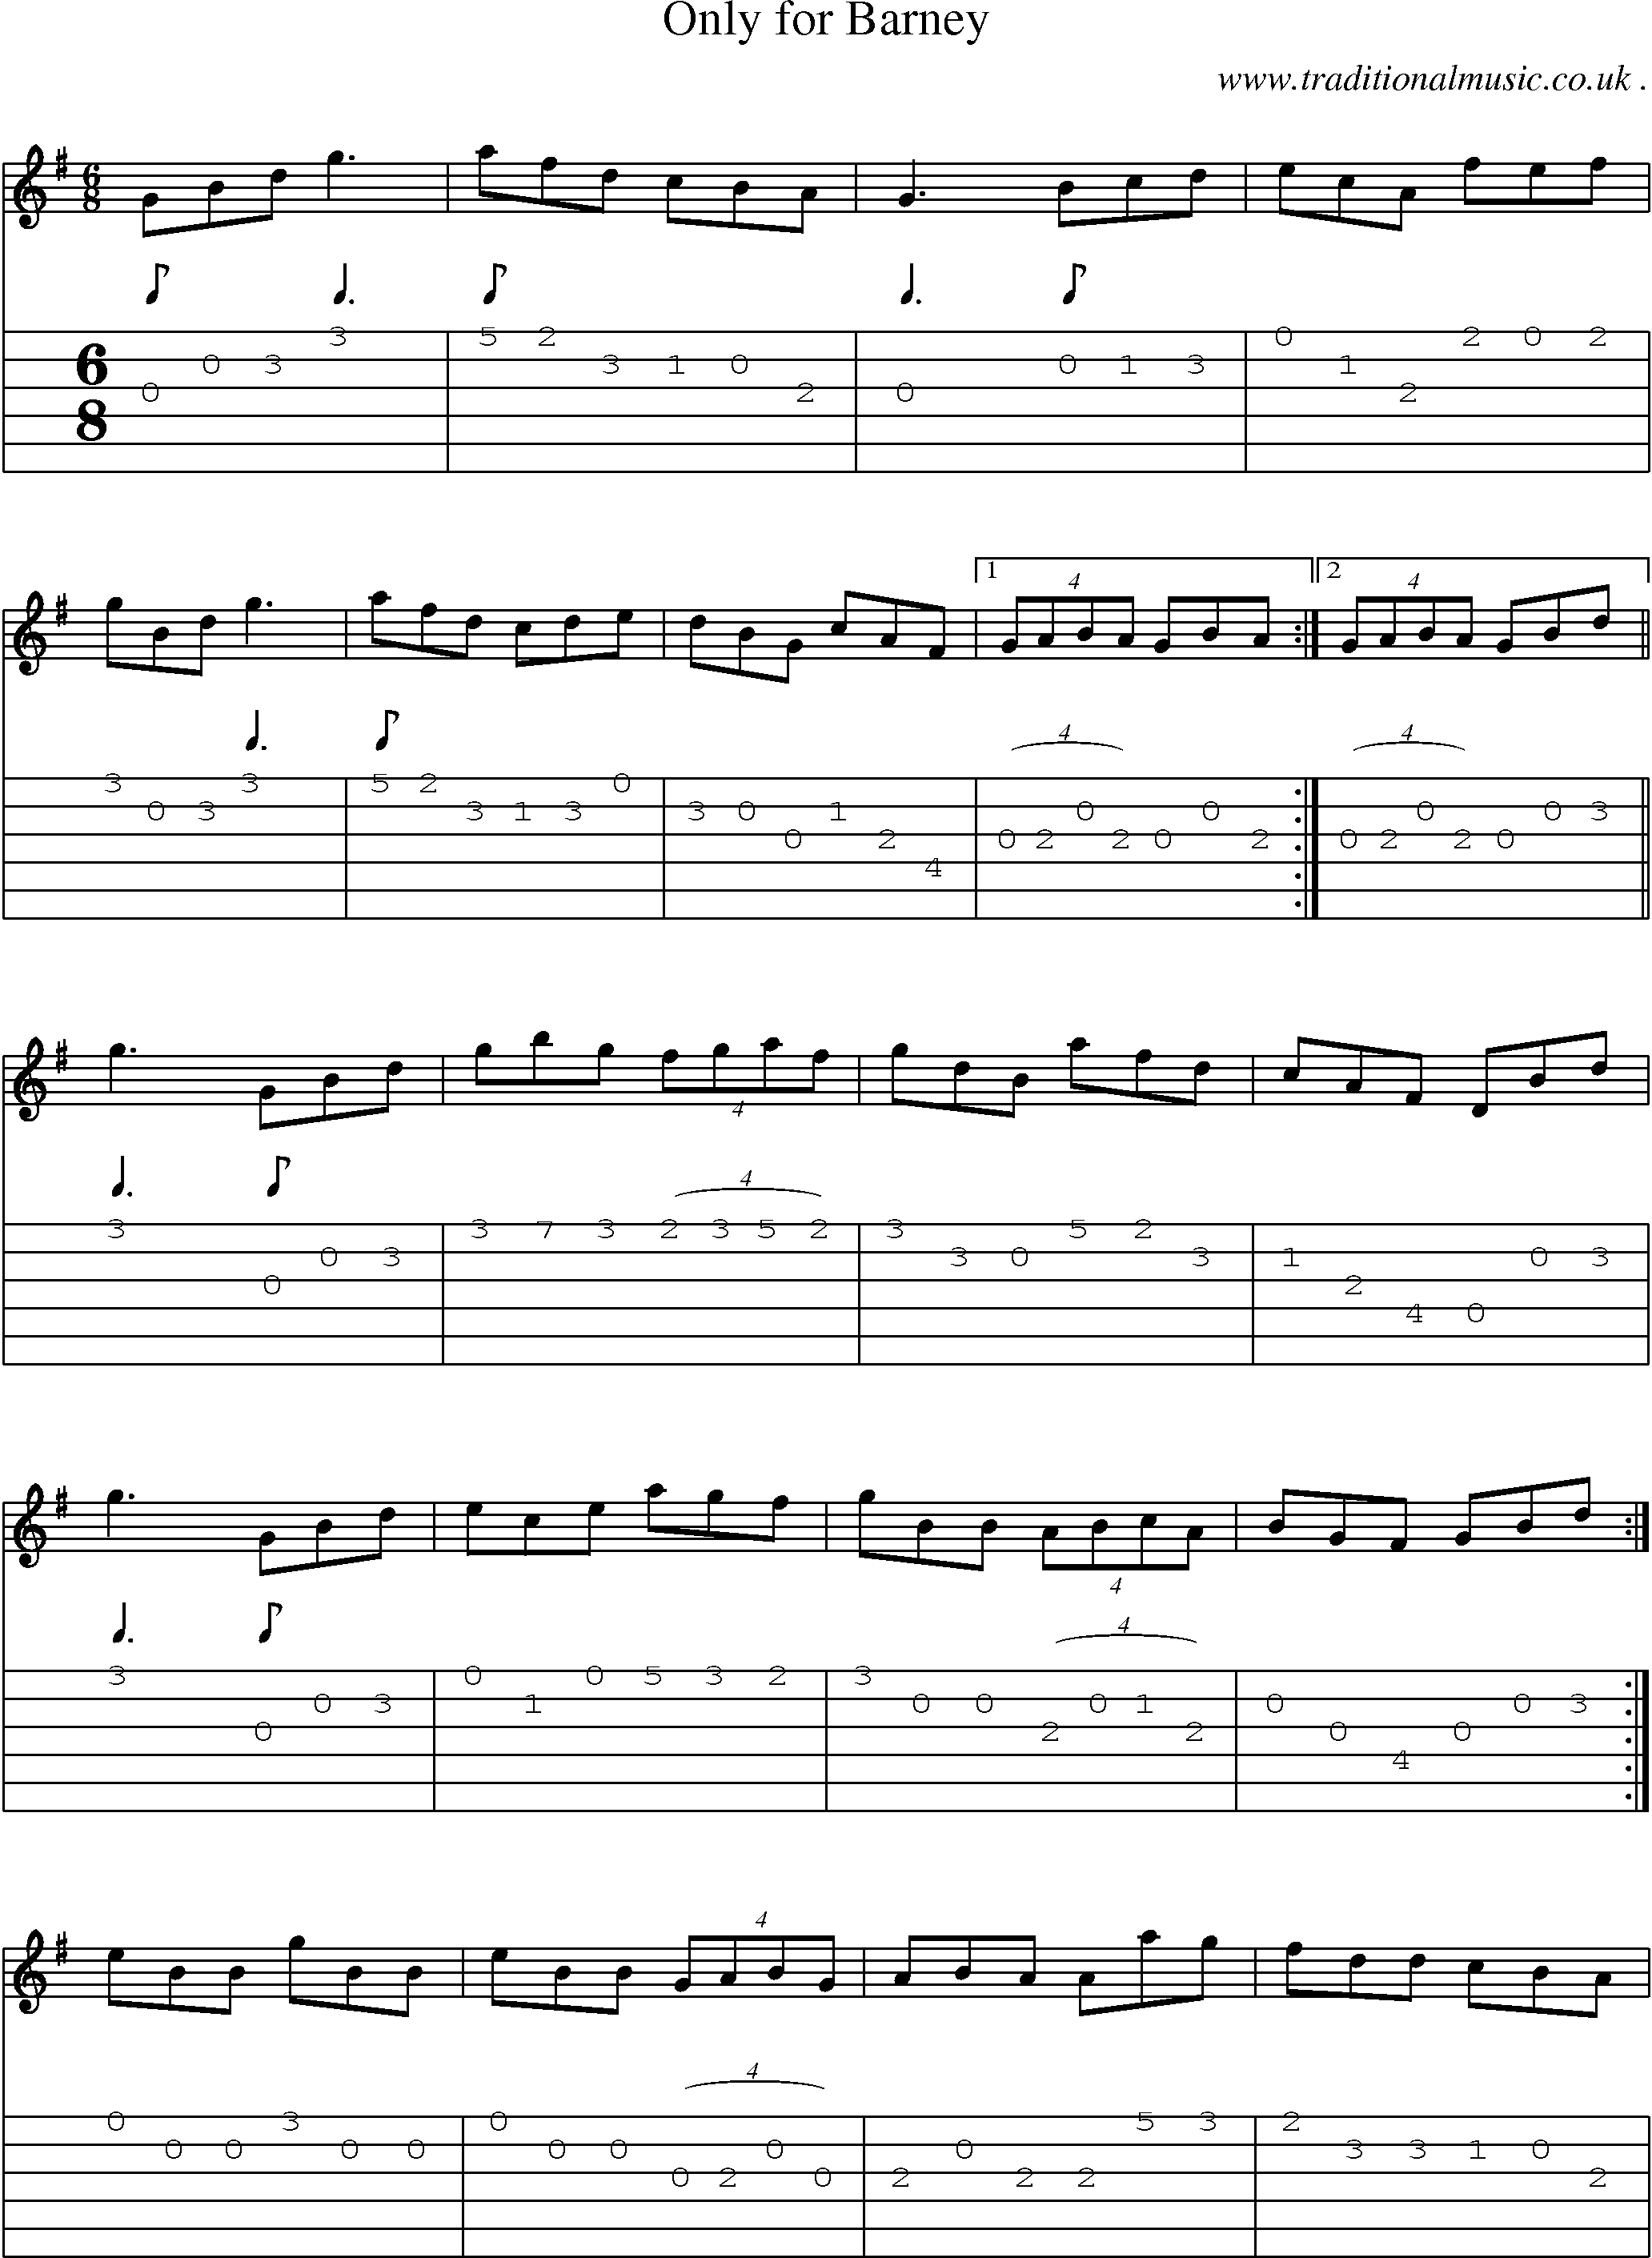 Sheet-Music and Guitar Tabs for Only For Barney